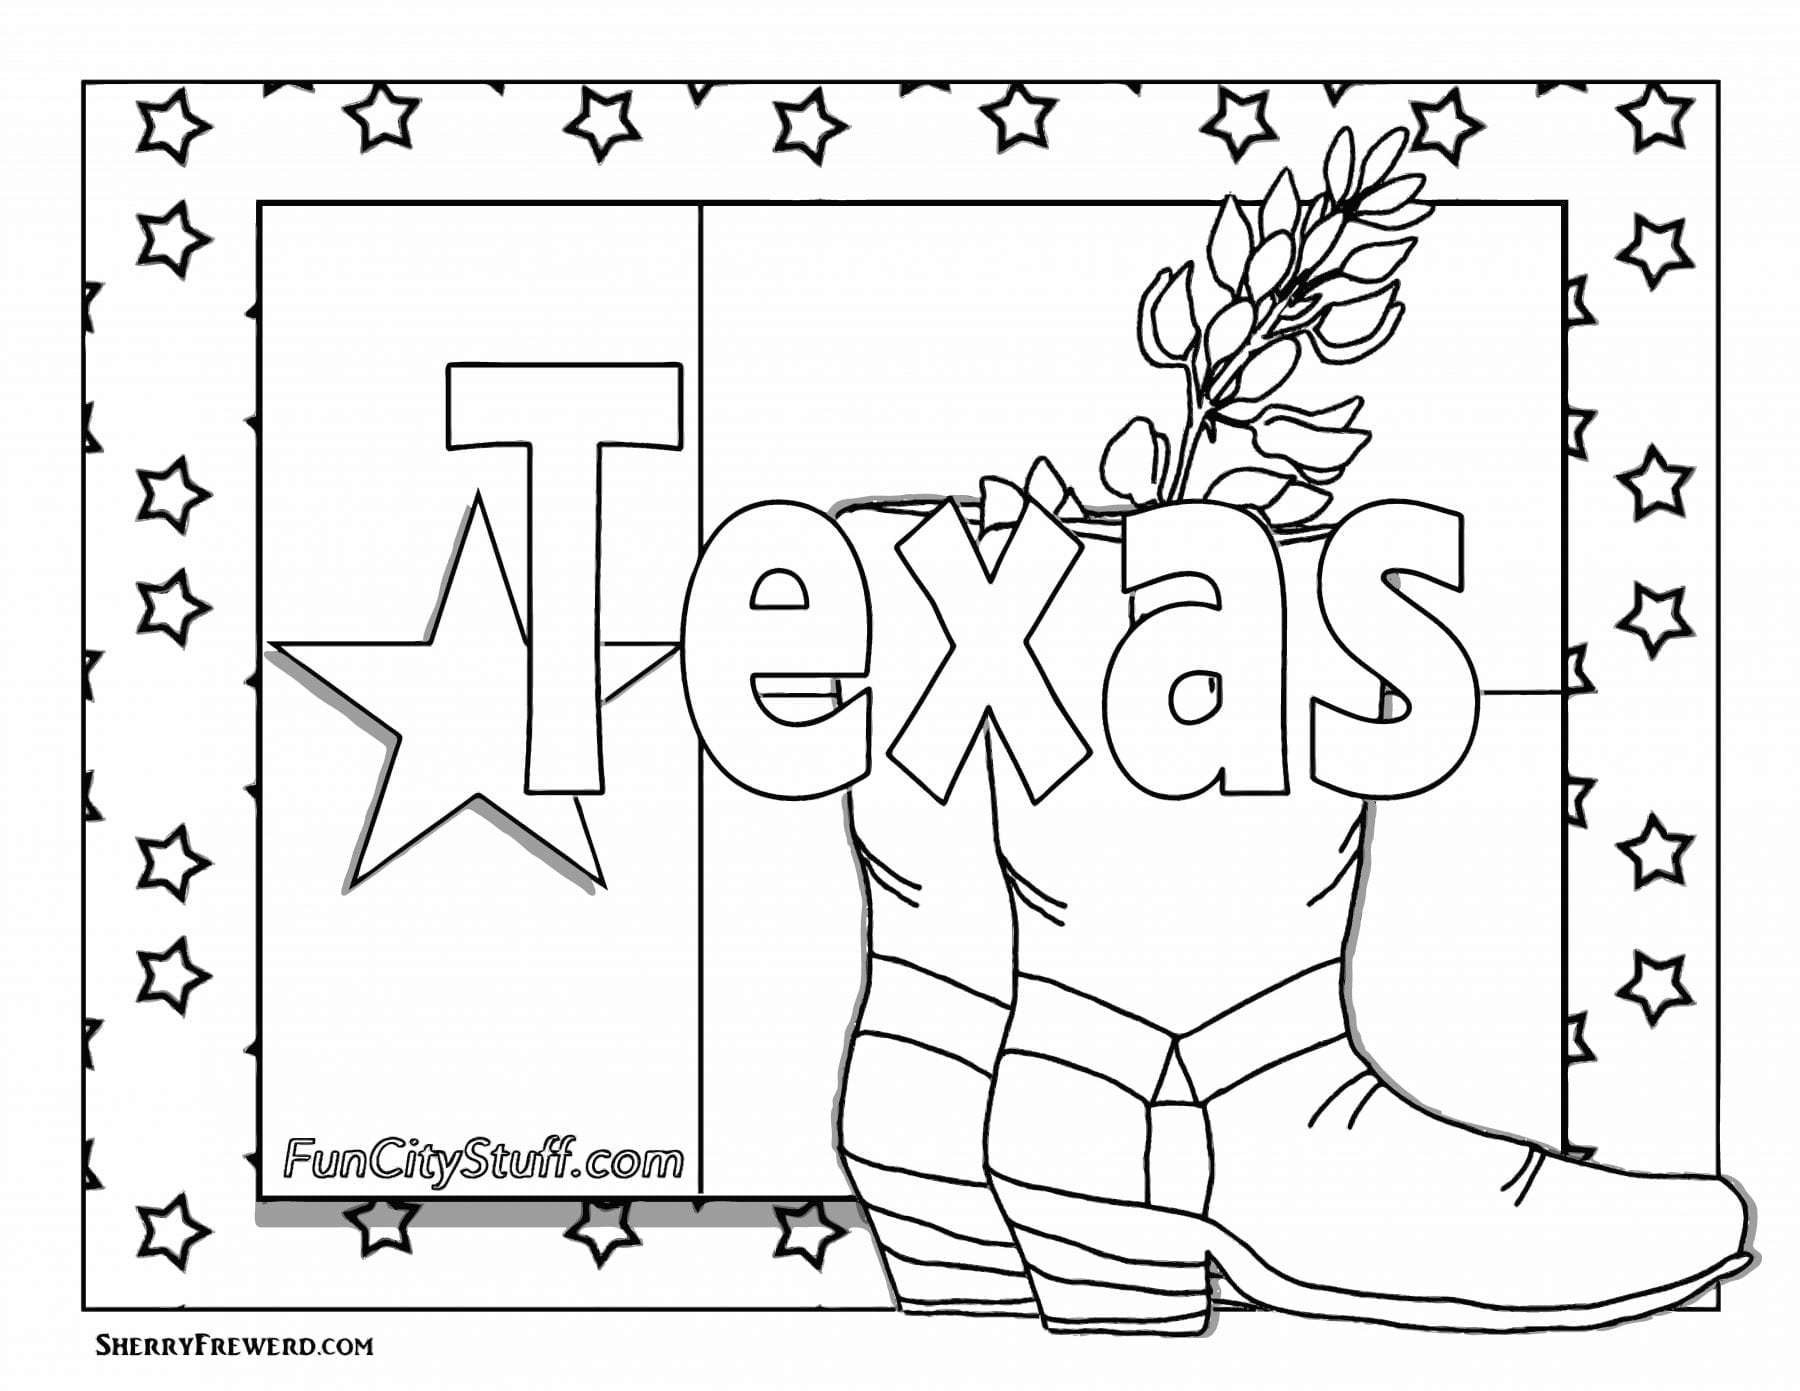 Texas Coloring Pages
 Color Your Cares Away Texas Style FunCity Stuff DFW